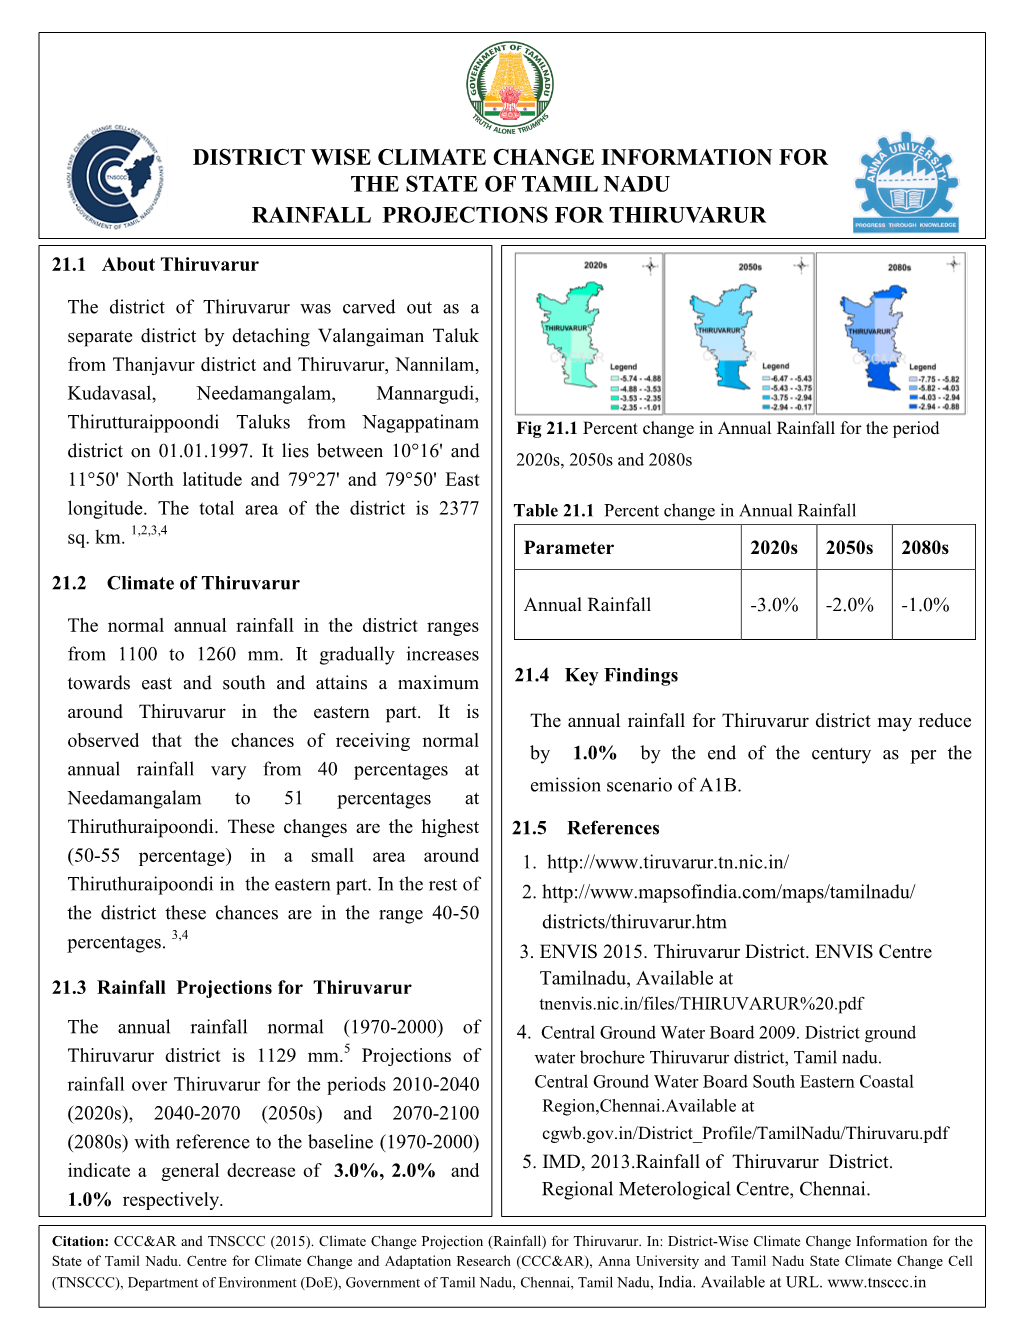 District Wise Climate Change Information for the State of Tamil Nadu Rainfall Projections for Thiruvarur